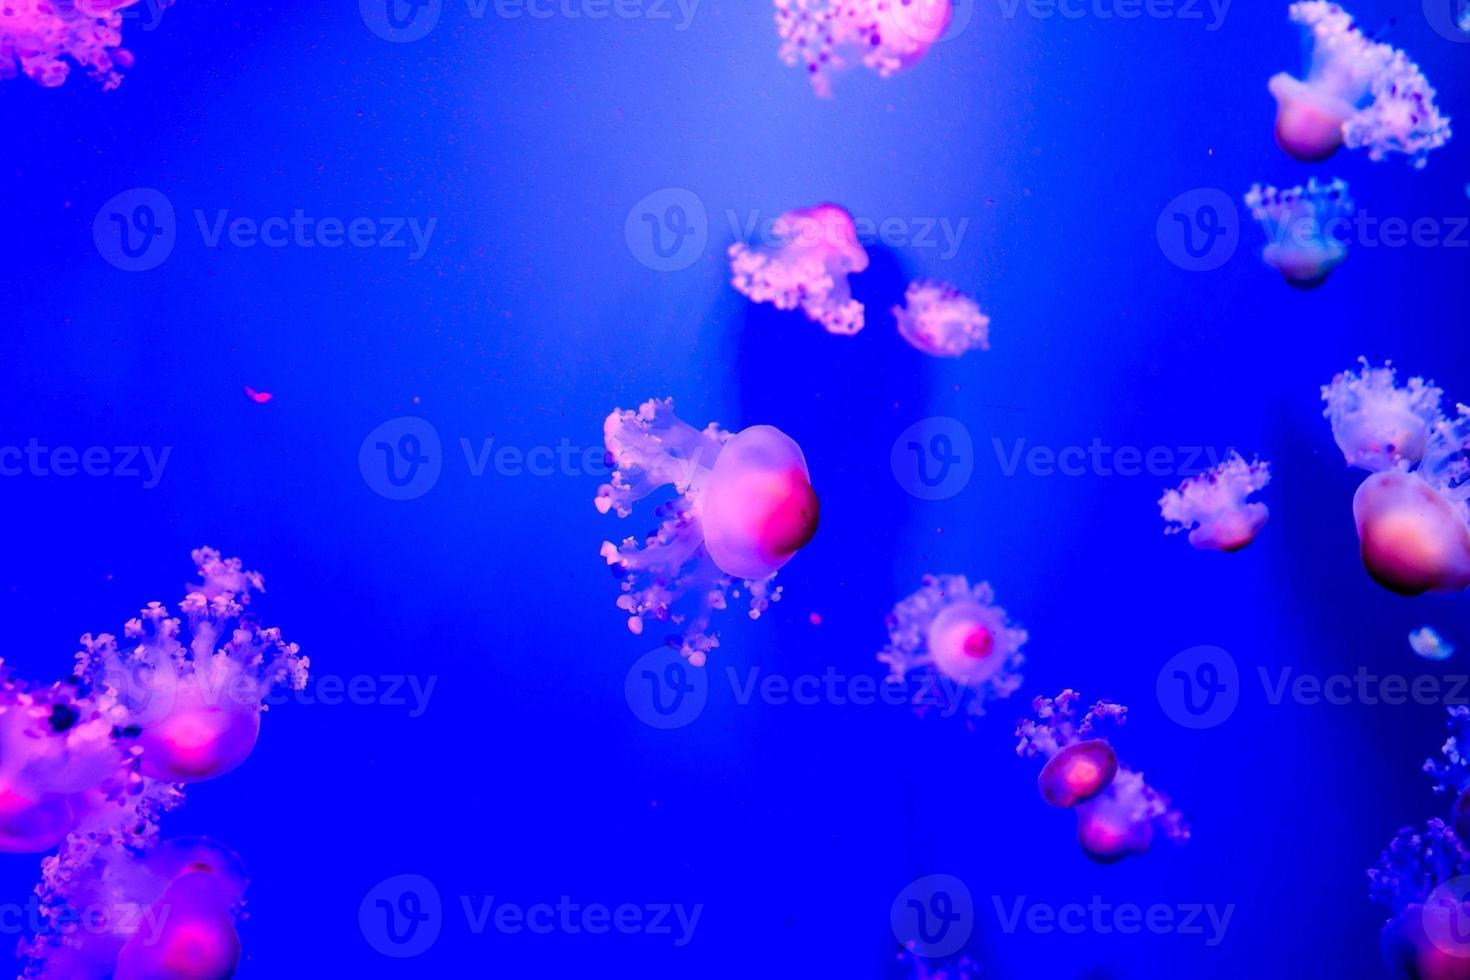 Jellyfish in the water photo